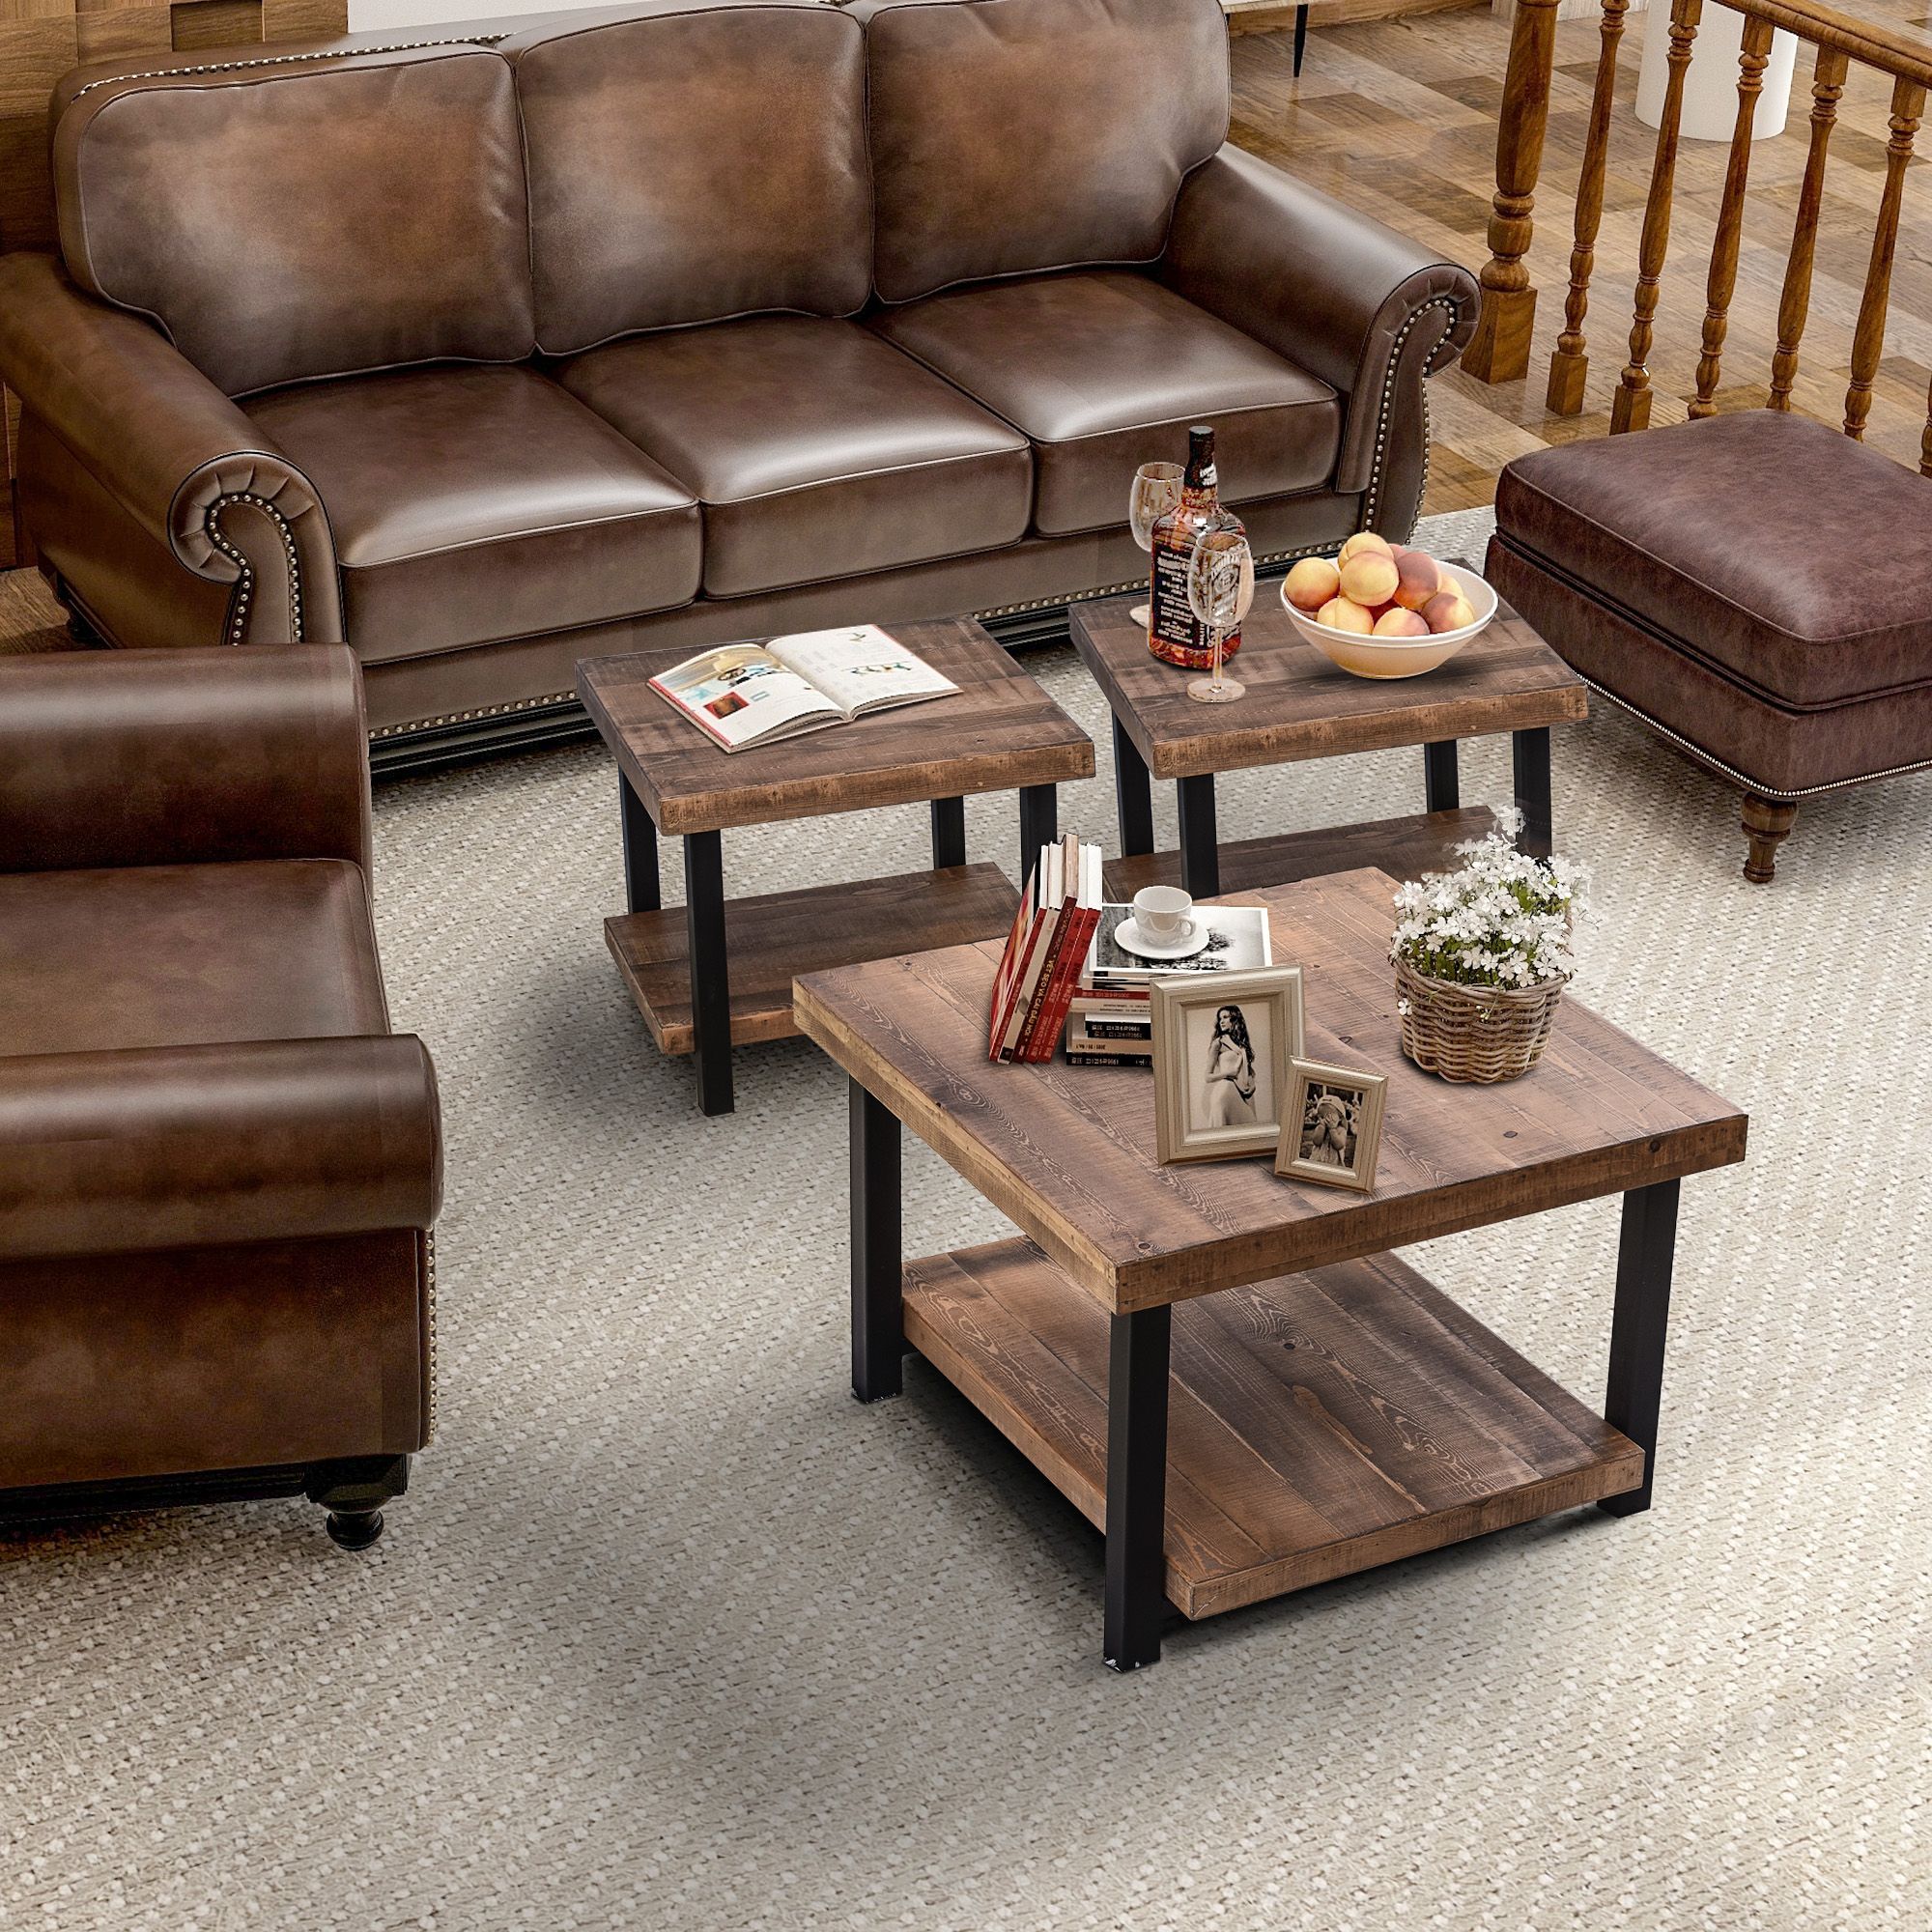 Preferred 3 Piece Coffee Tables In Harper&bright Designs Industrial Pine Wood Coffee Table  (View 14 of 20)